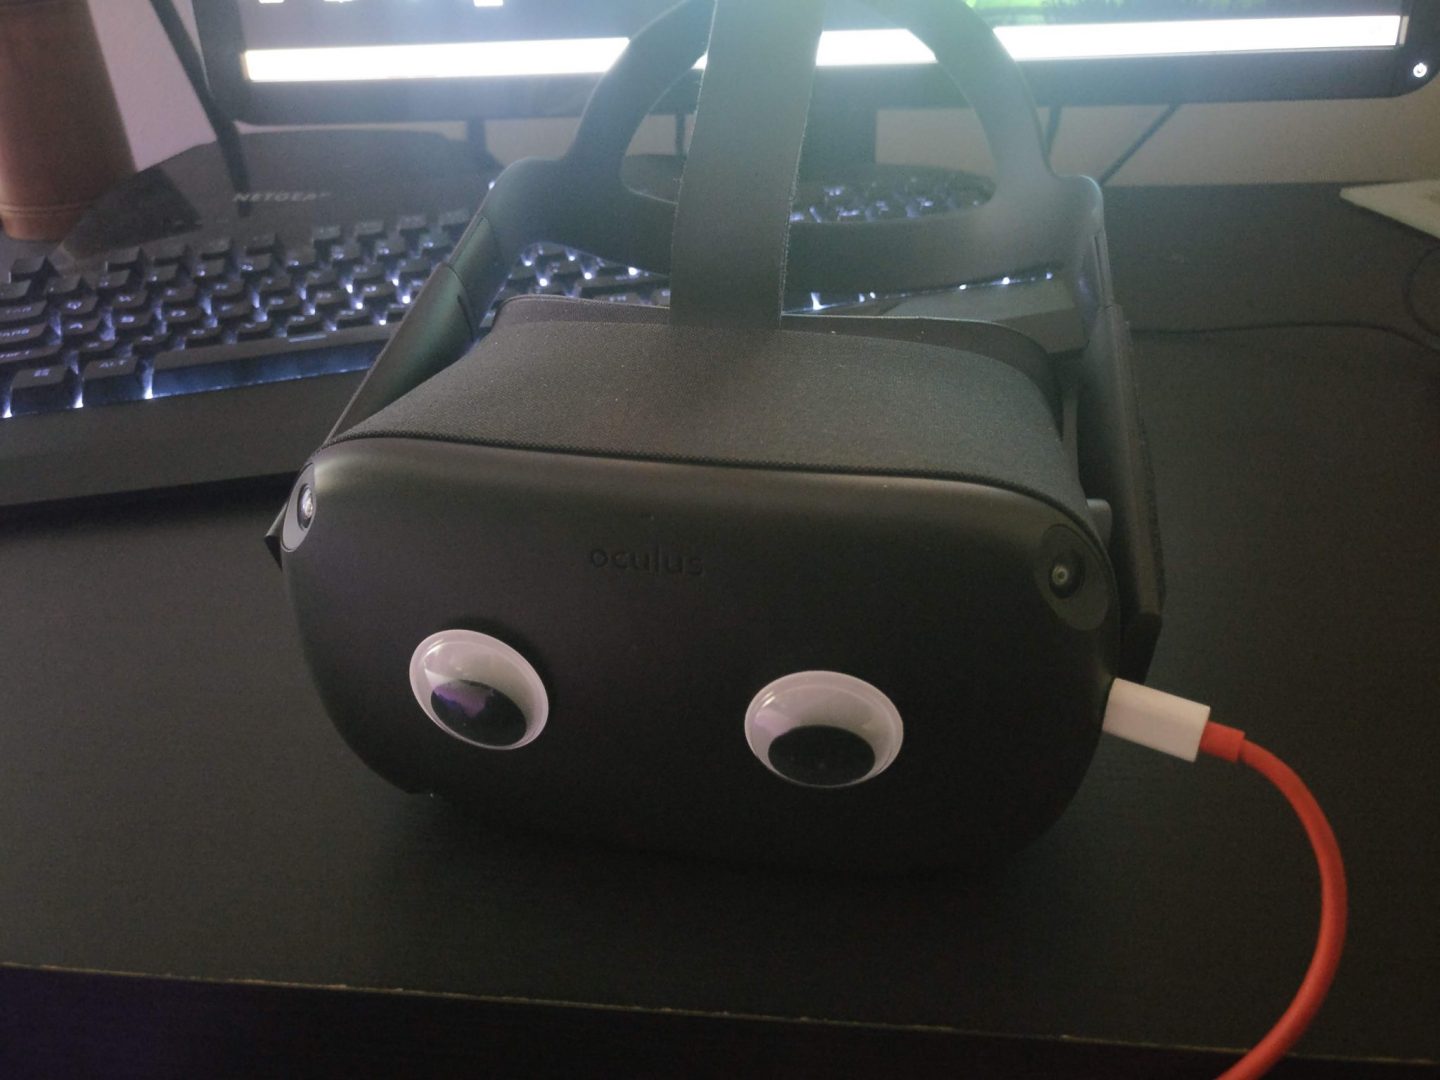 oculus quest 2 without pc